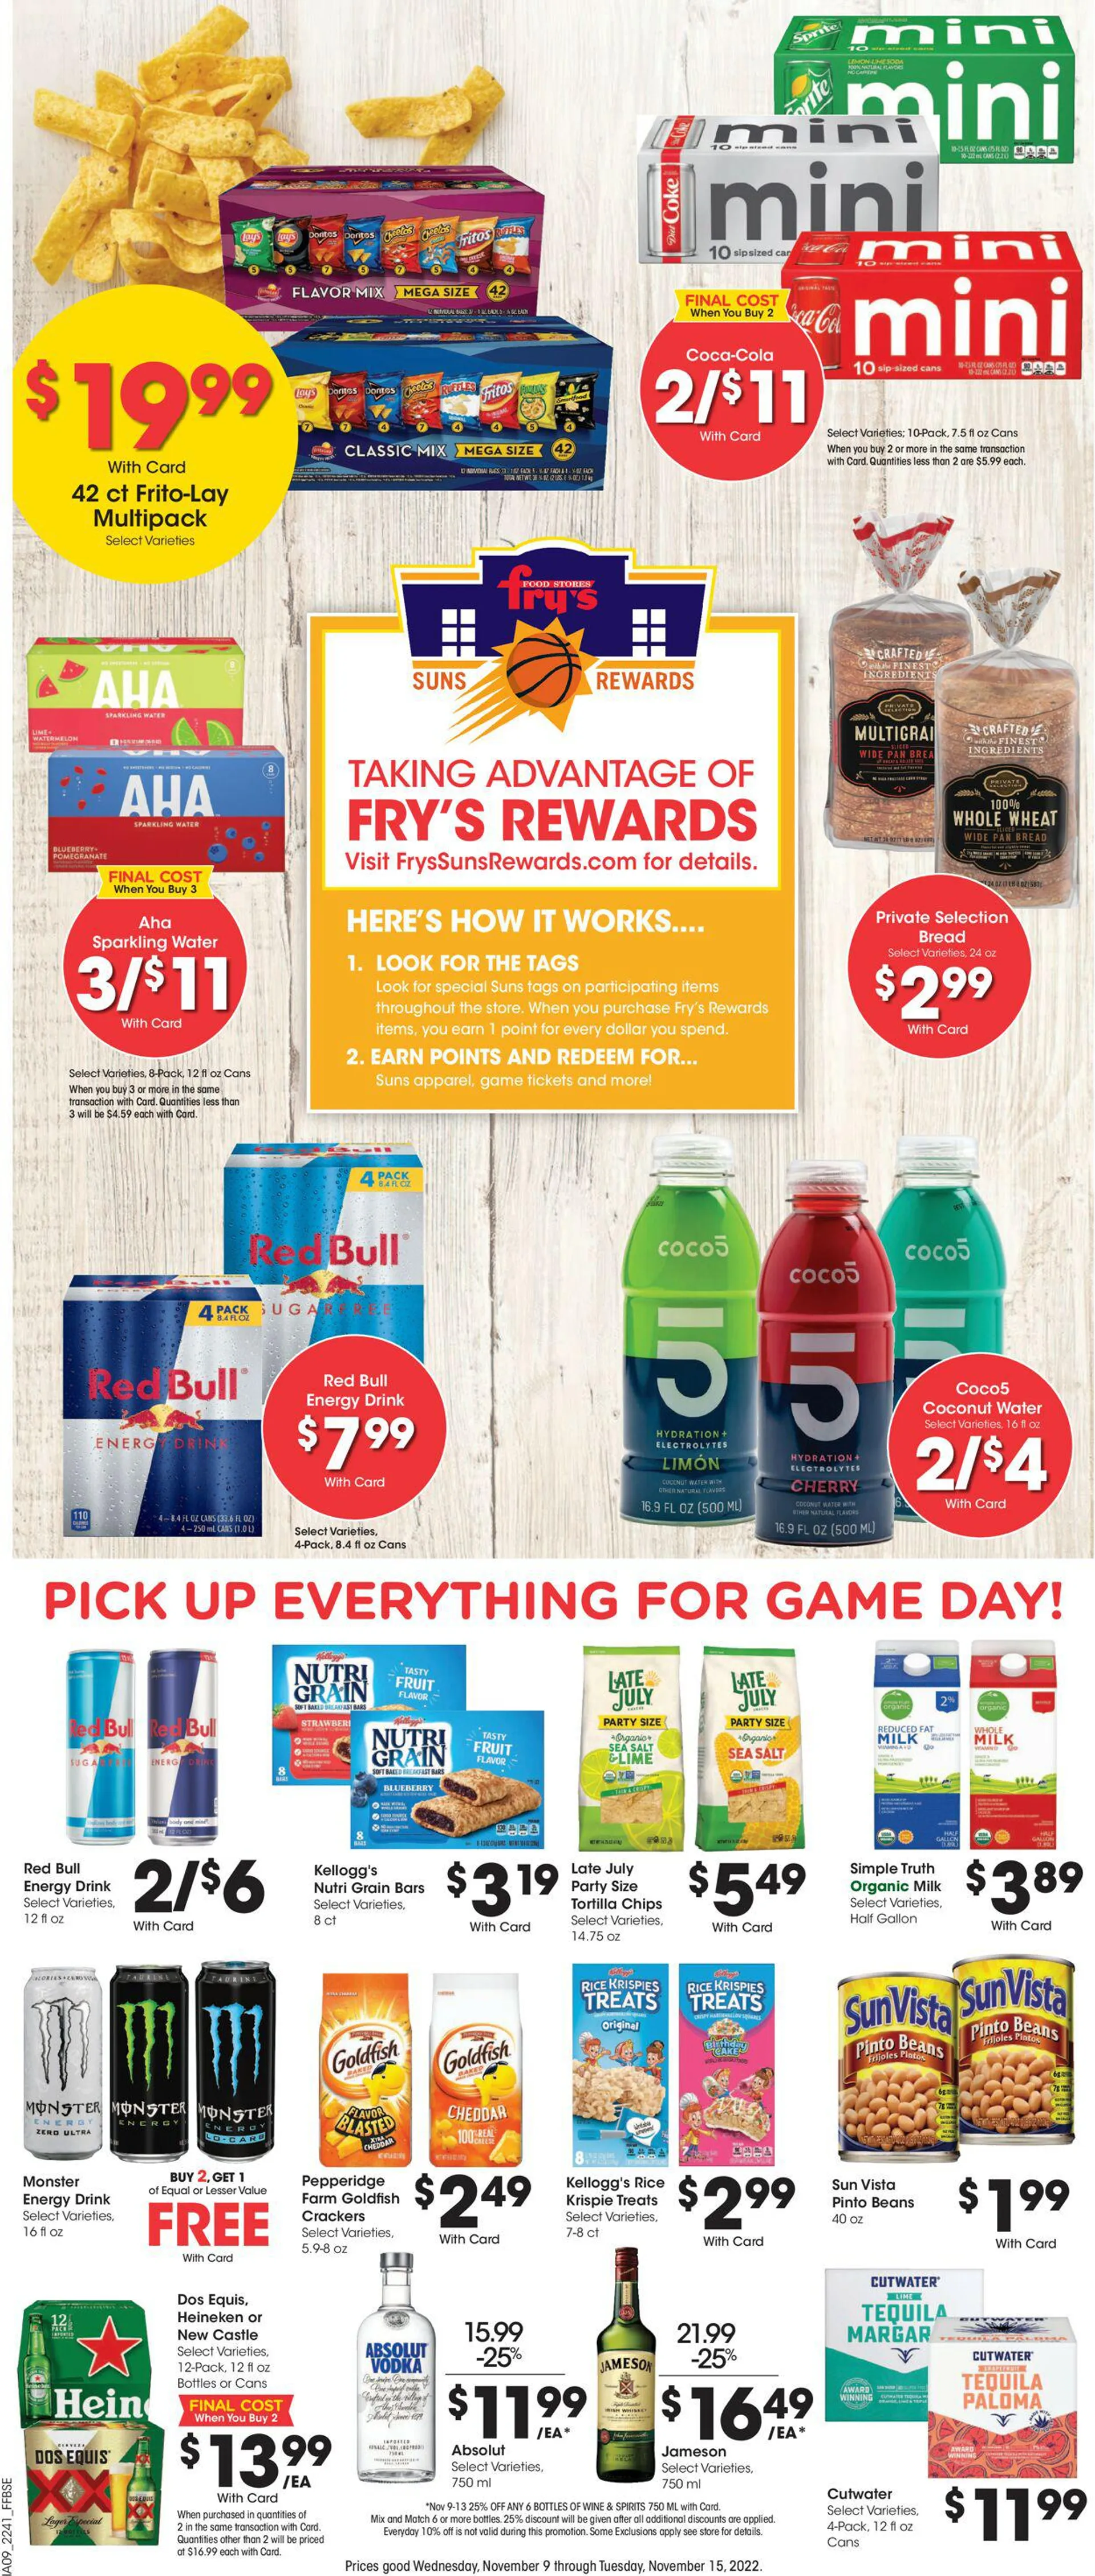 Fry’s Current weekly ad - 17